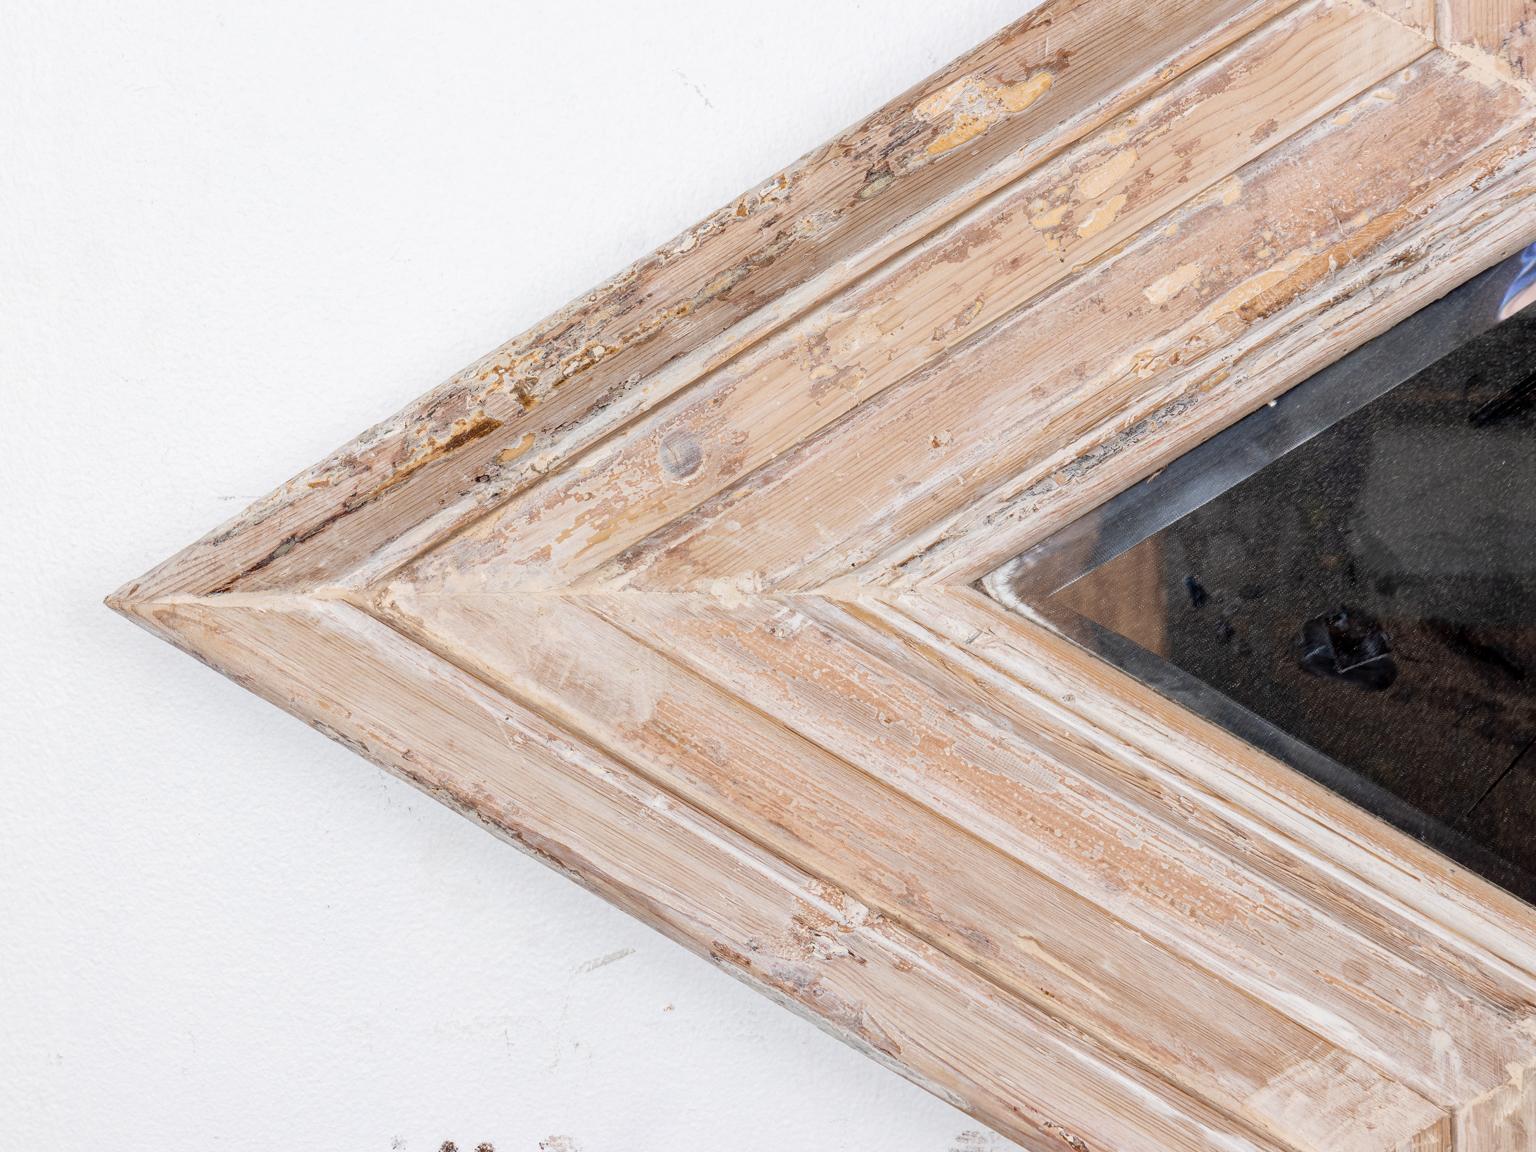 Wood starburst shaped mirror in a whitewashed finish with molded trim and beveled mirror plate. Please note of wear consistent with age including paint loss and distressed finish to the wood.